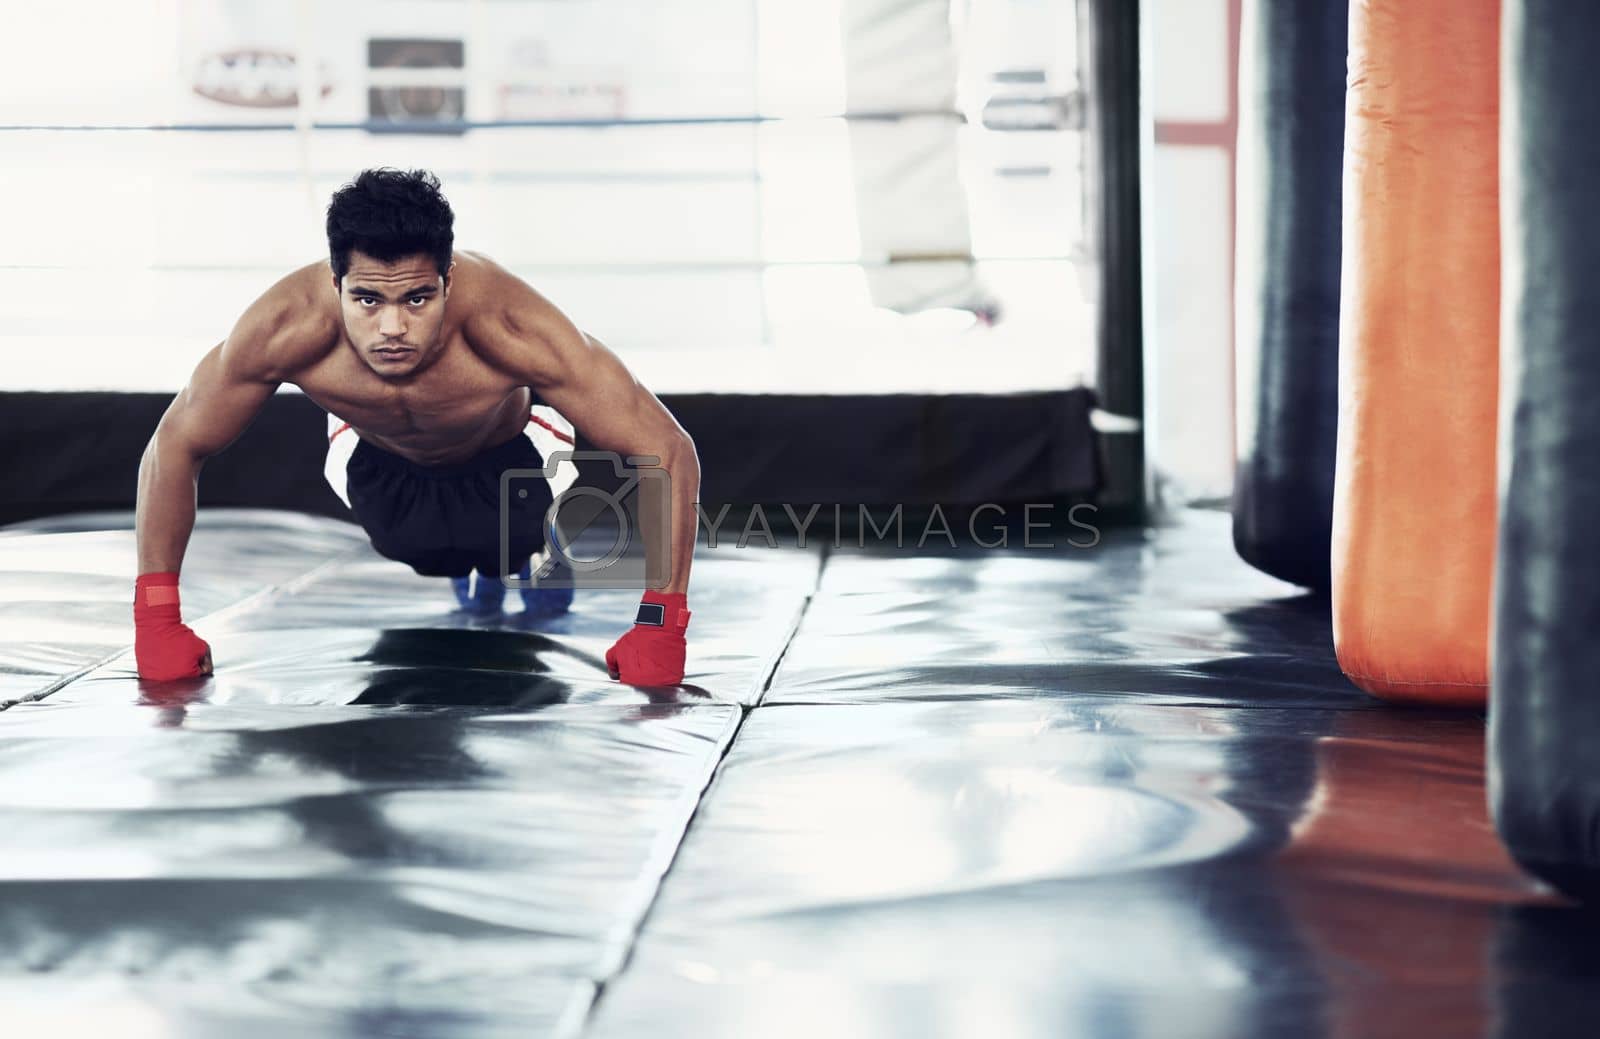 Royalty free image of Boxing is a way of life. A focused young boxer doing push-ups in the gym. by YuriArcurs